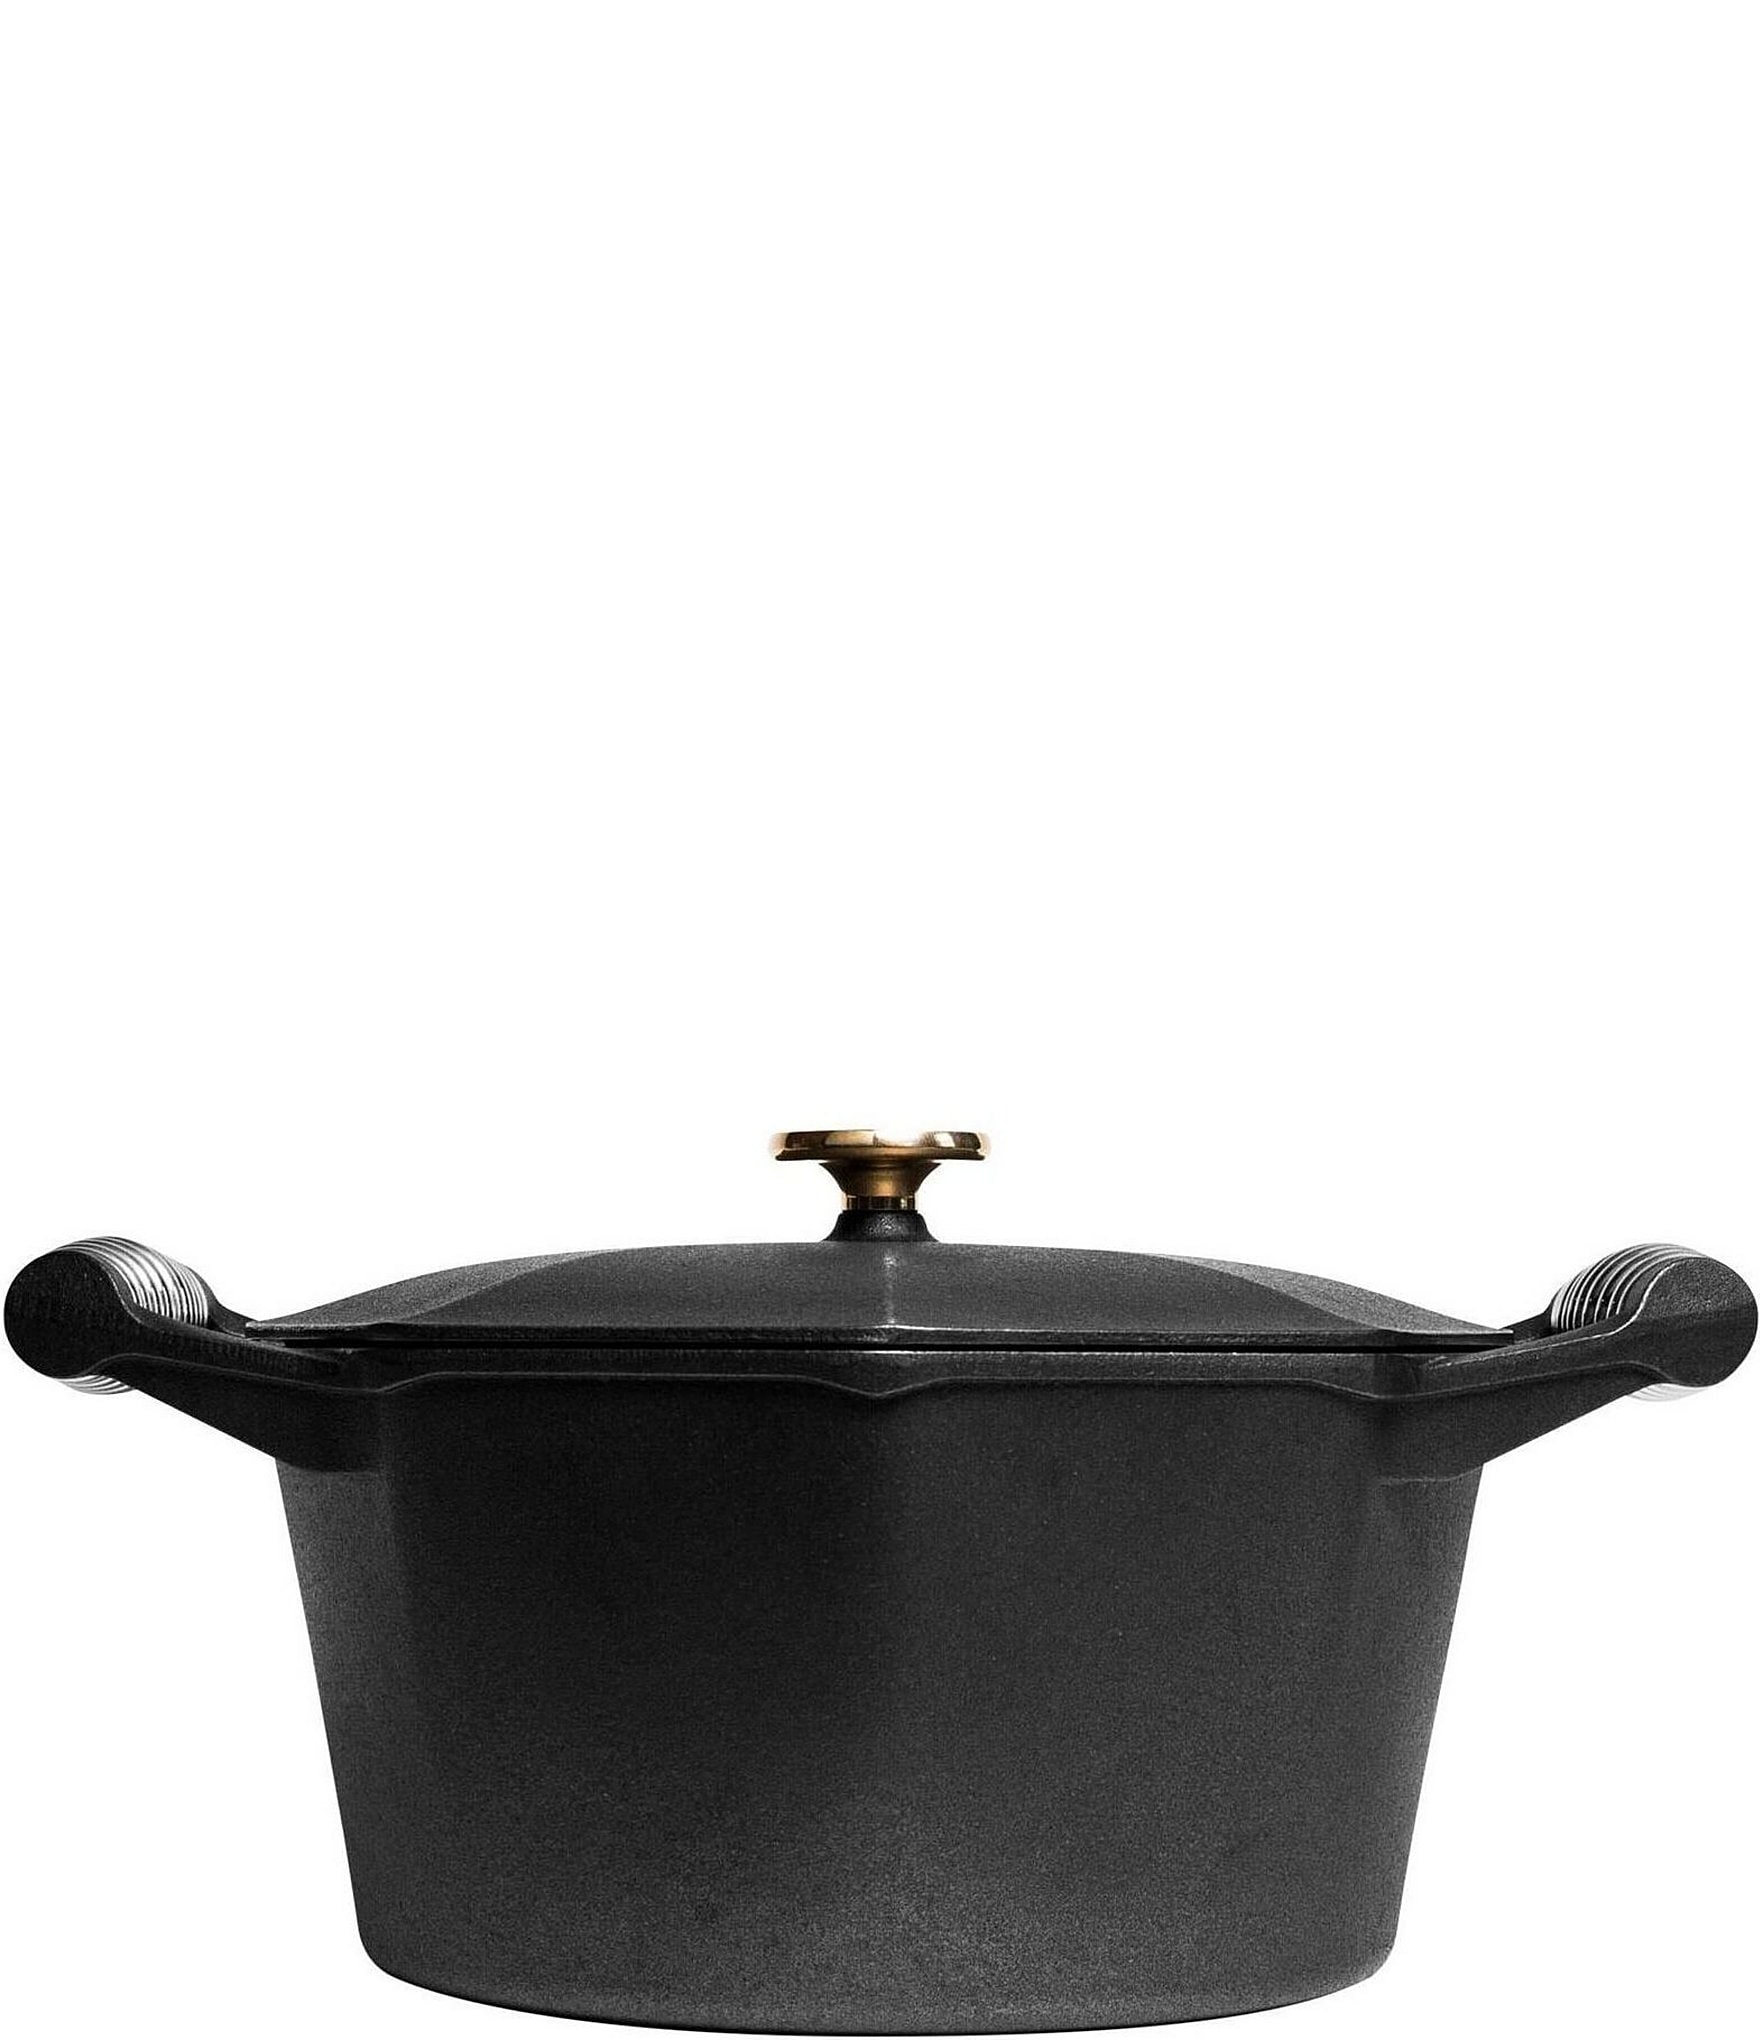 Finex Cast Iron Skillet with Lid + Reviews